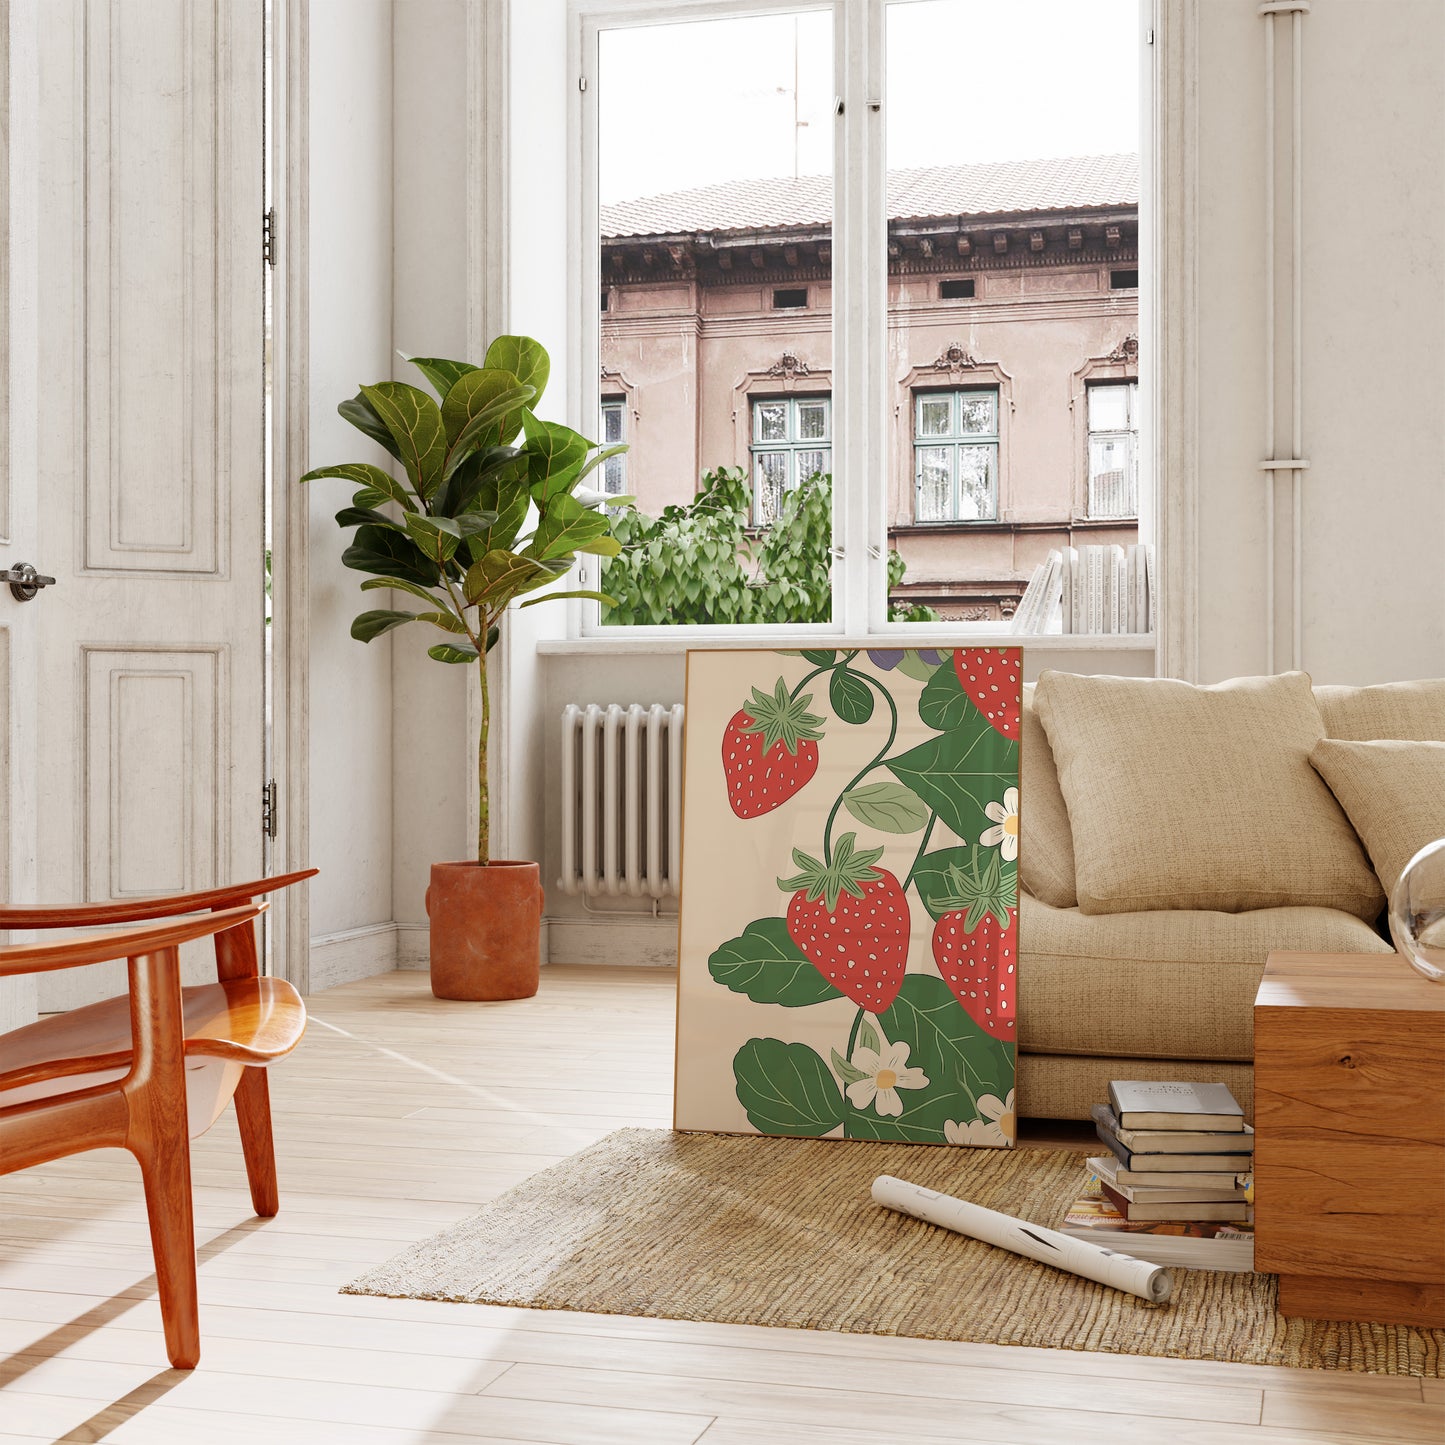 A cozy living room with a modern sofa, wooden furniture, and a plant-themed decor.